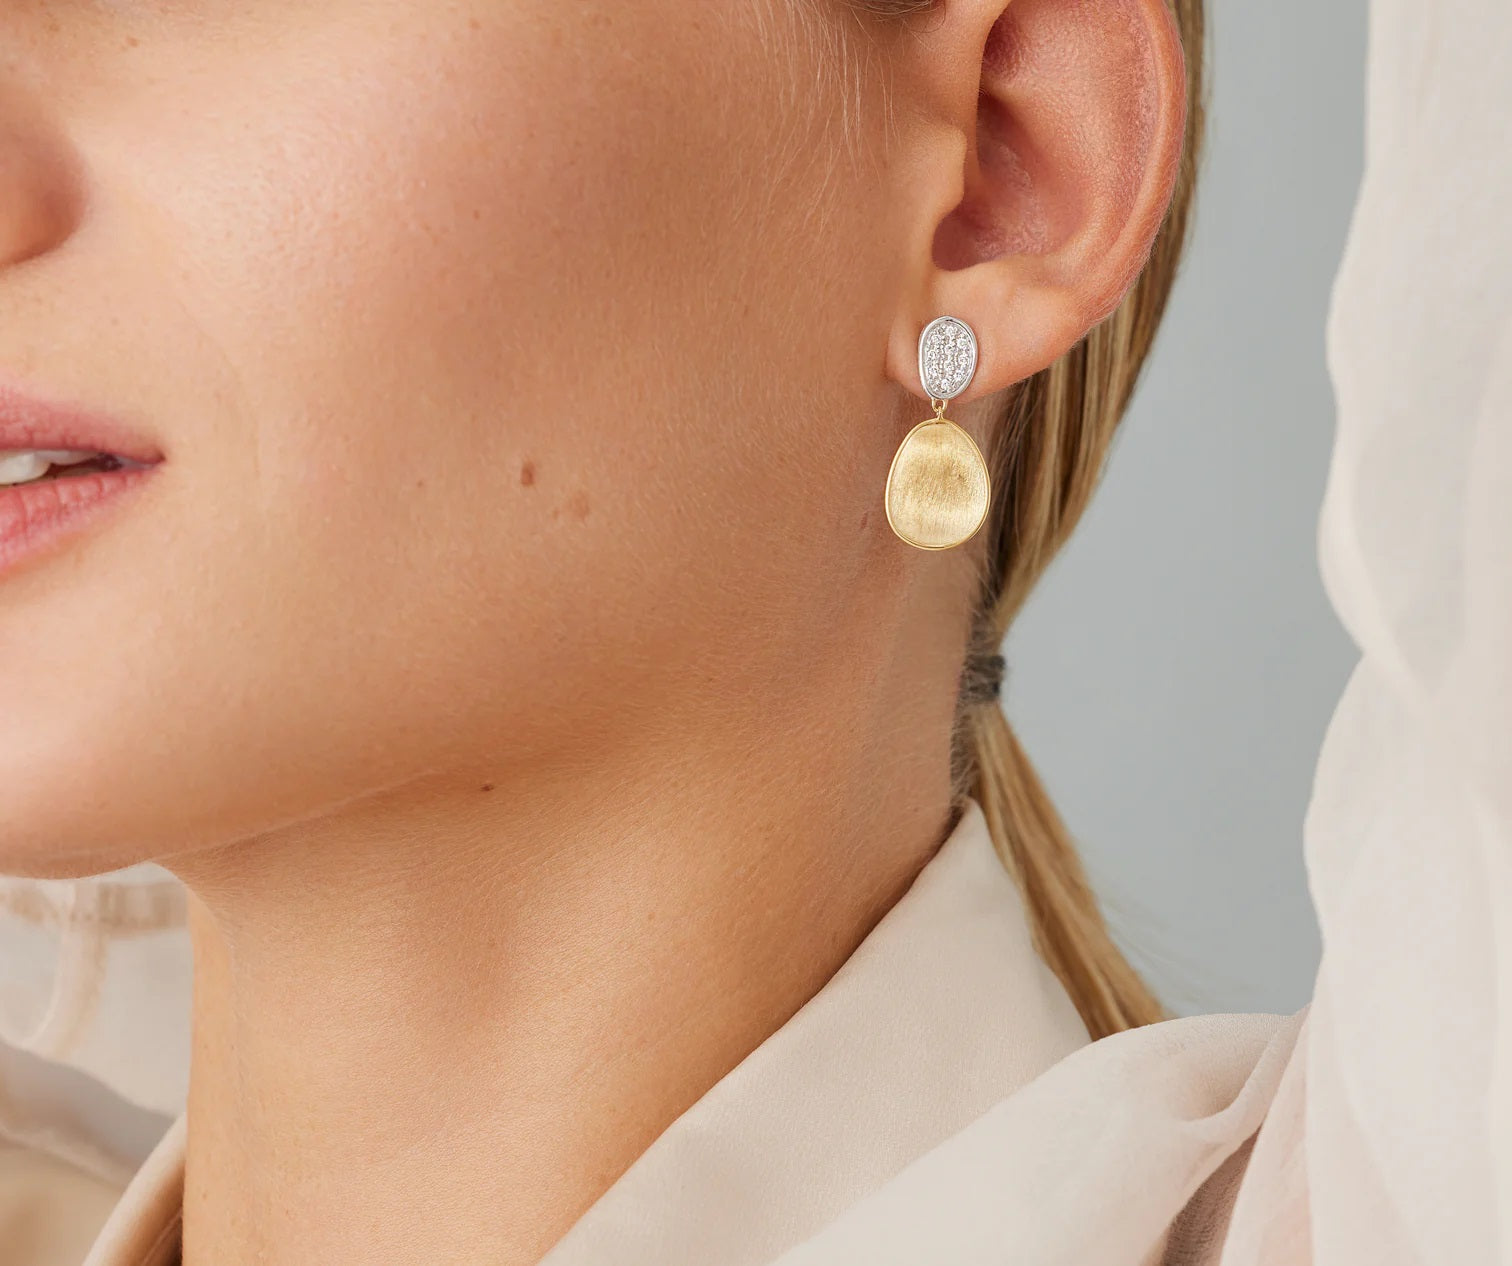 18K YELLOW GOLD DOUBLE DROP EARRINGS WITH DIAMONDS FROM THE LUNARIA COLLECTION